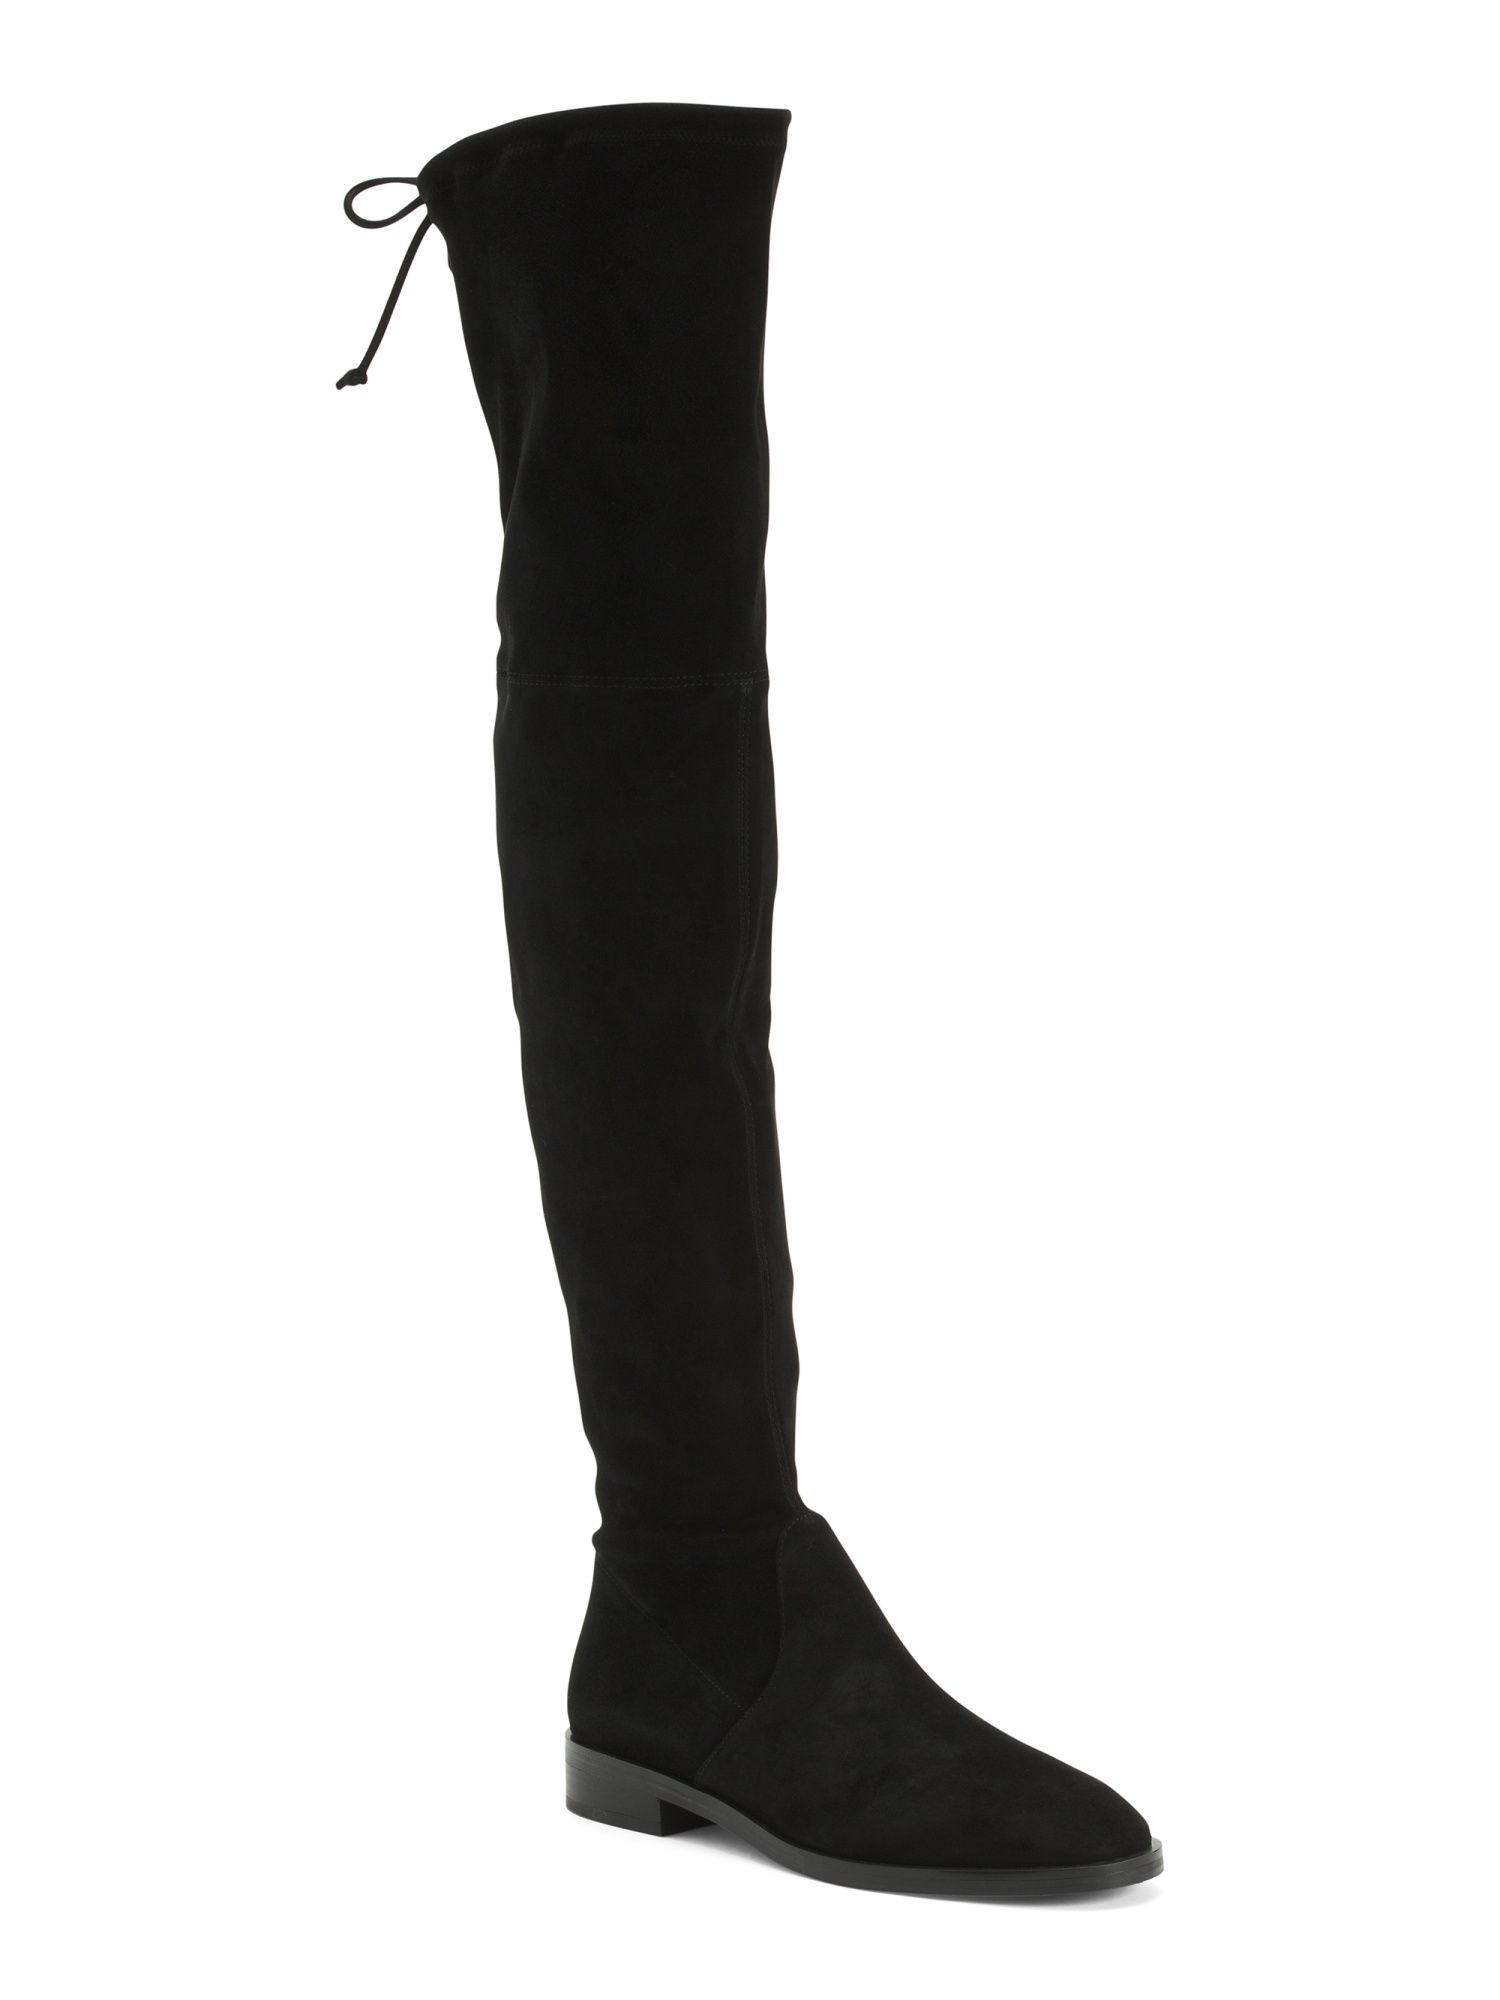 Over The Knee Suede Flat Boots | TJ Maxx